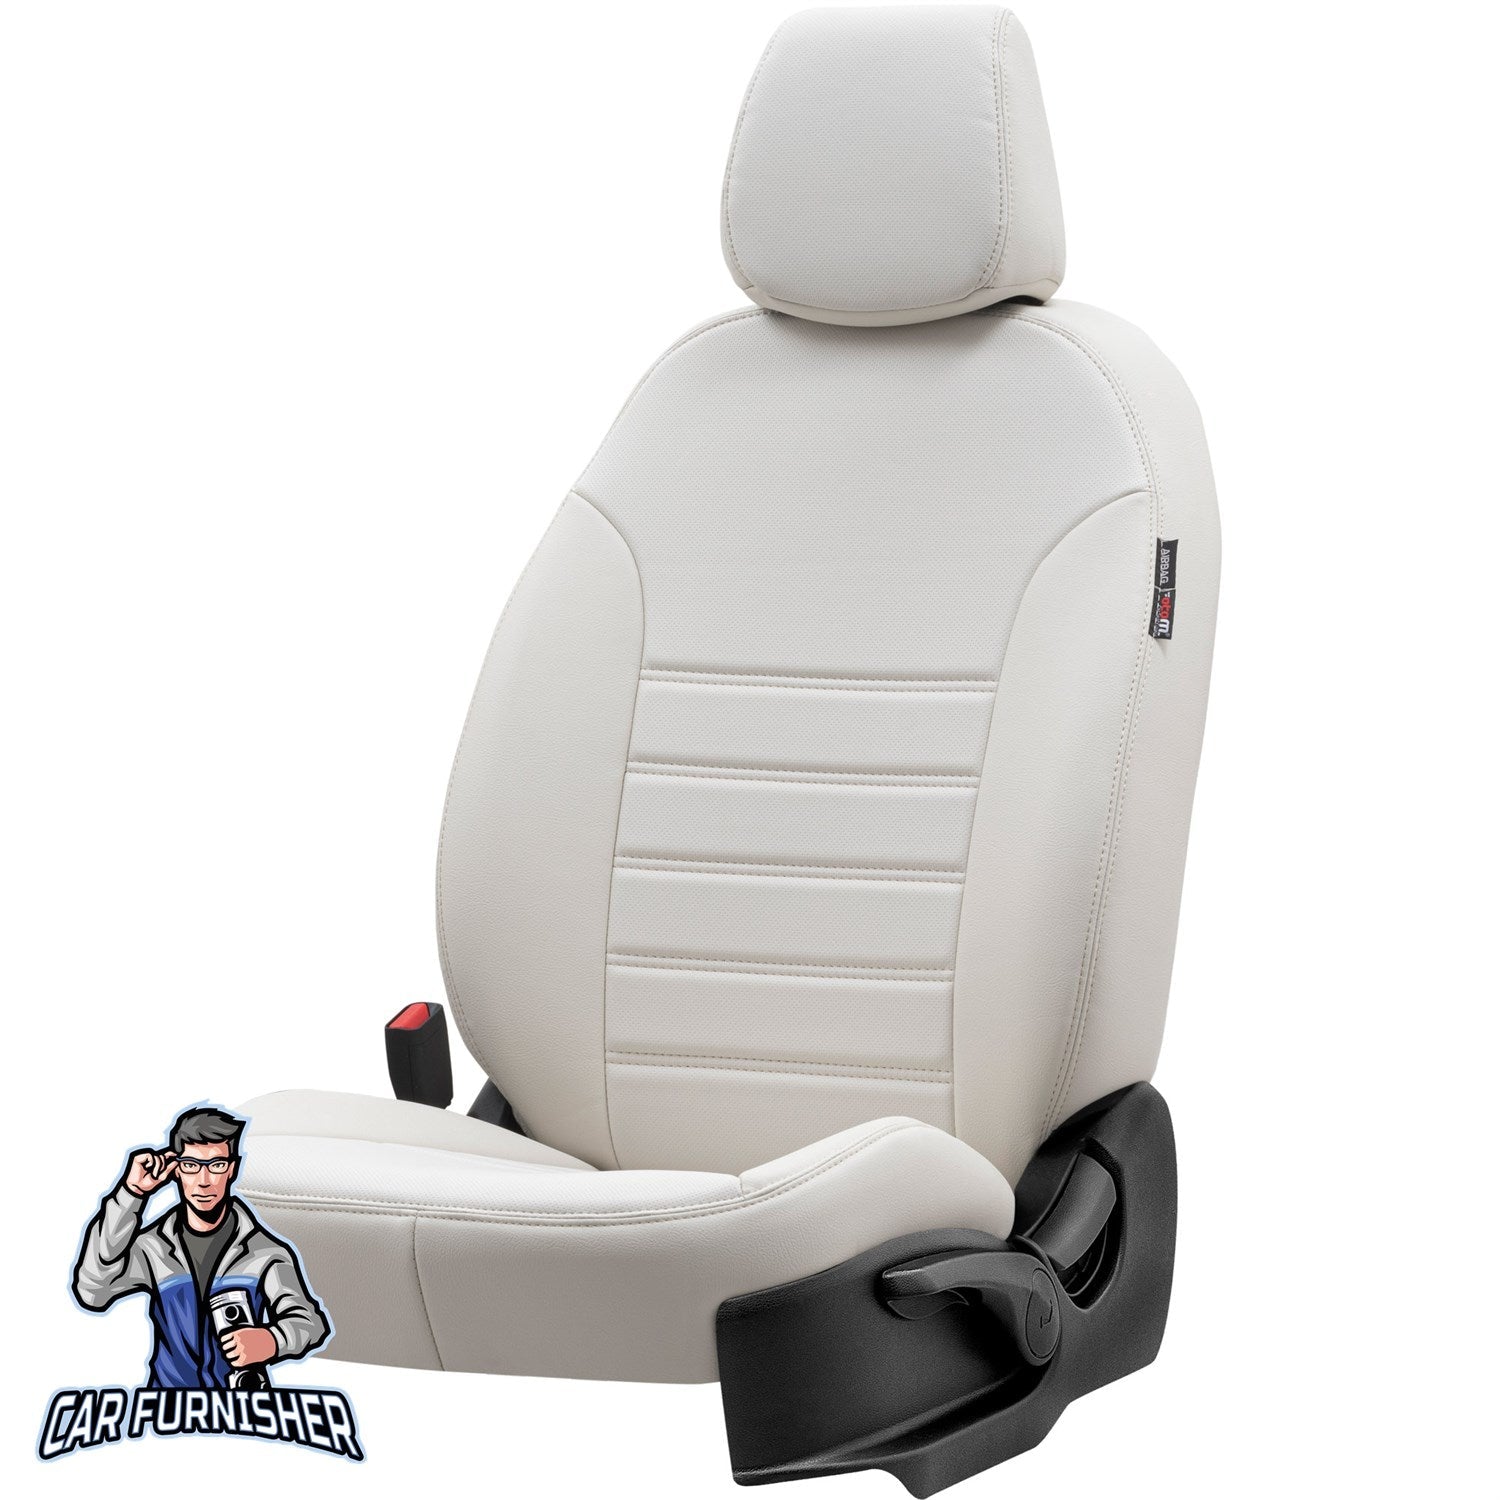 Mitsubishi Outlander Car Seat Covers 2012-2023 Istanbul Design Ivory Leather & Fabric